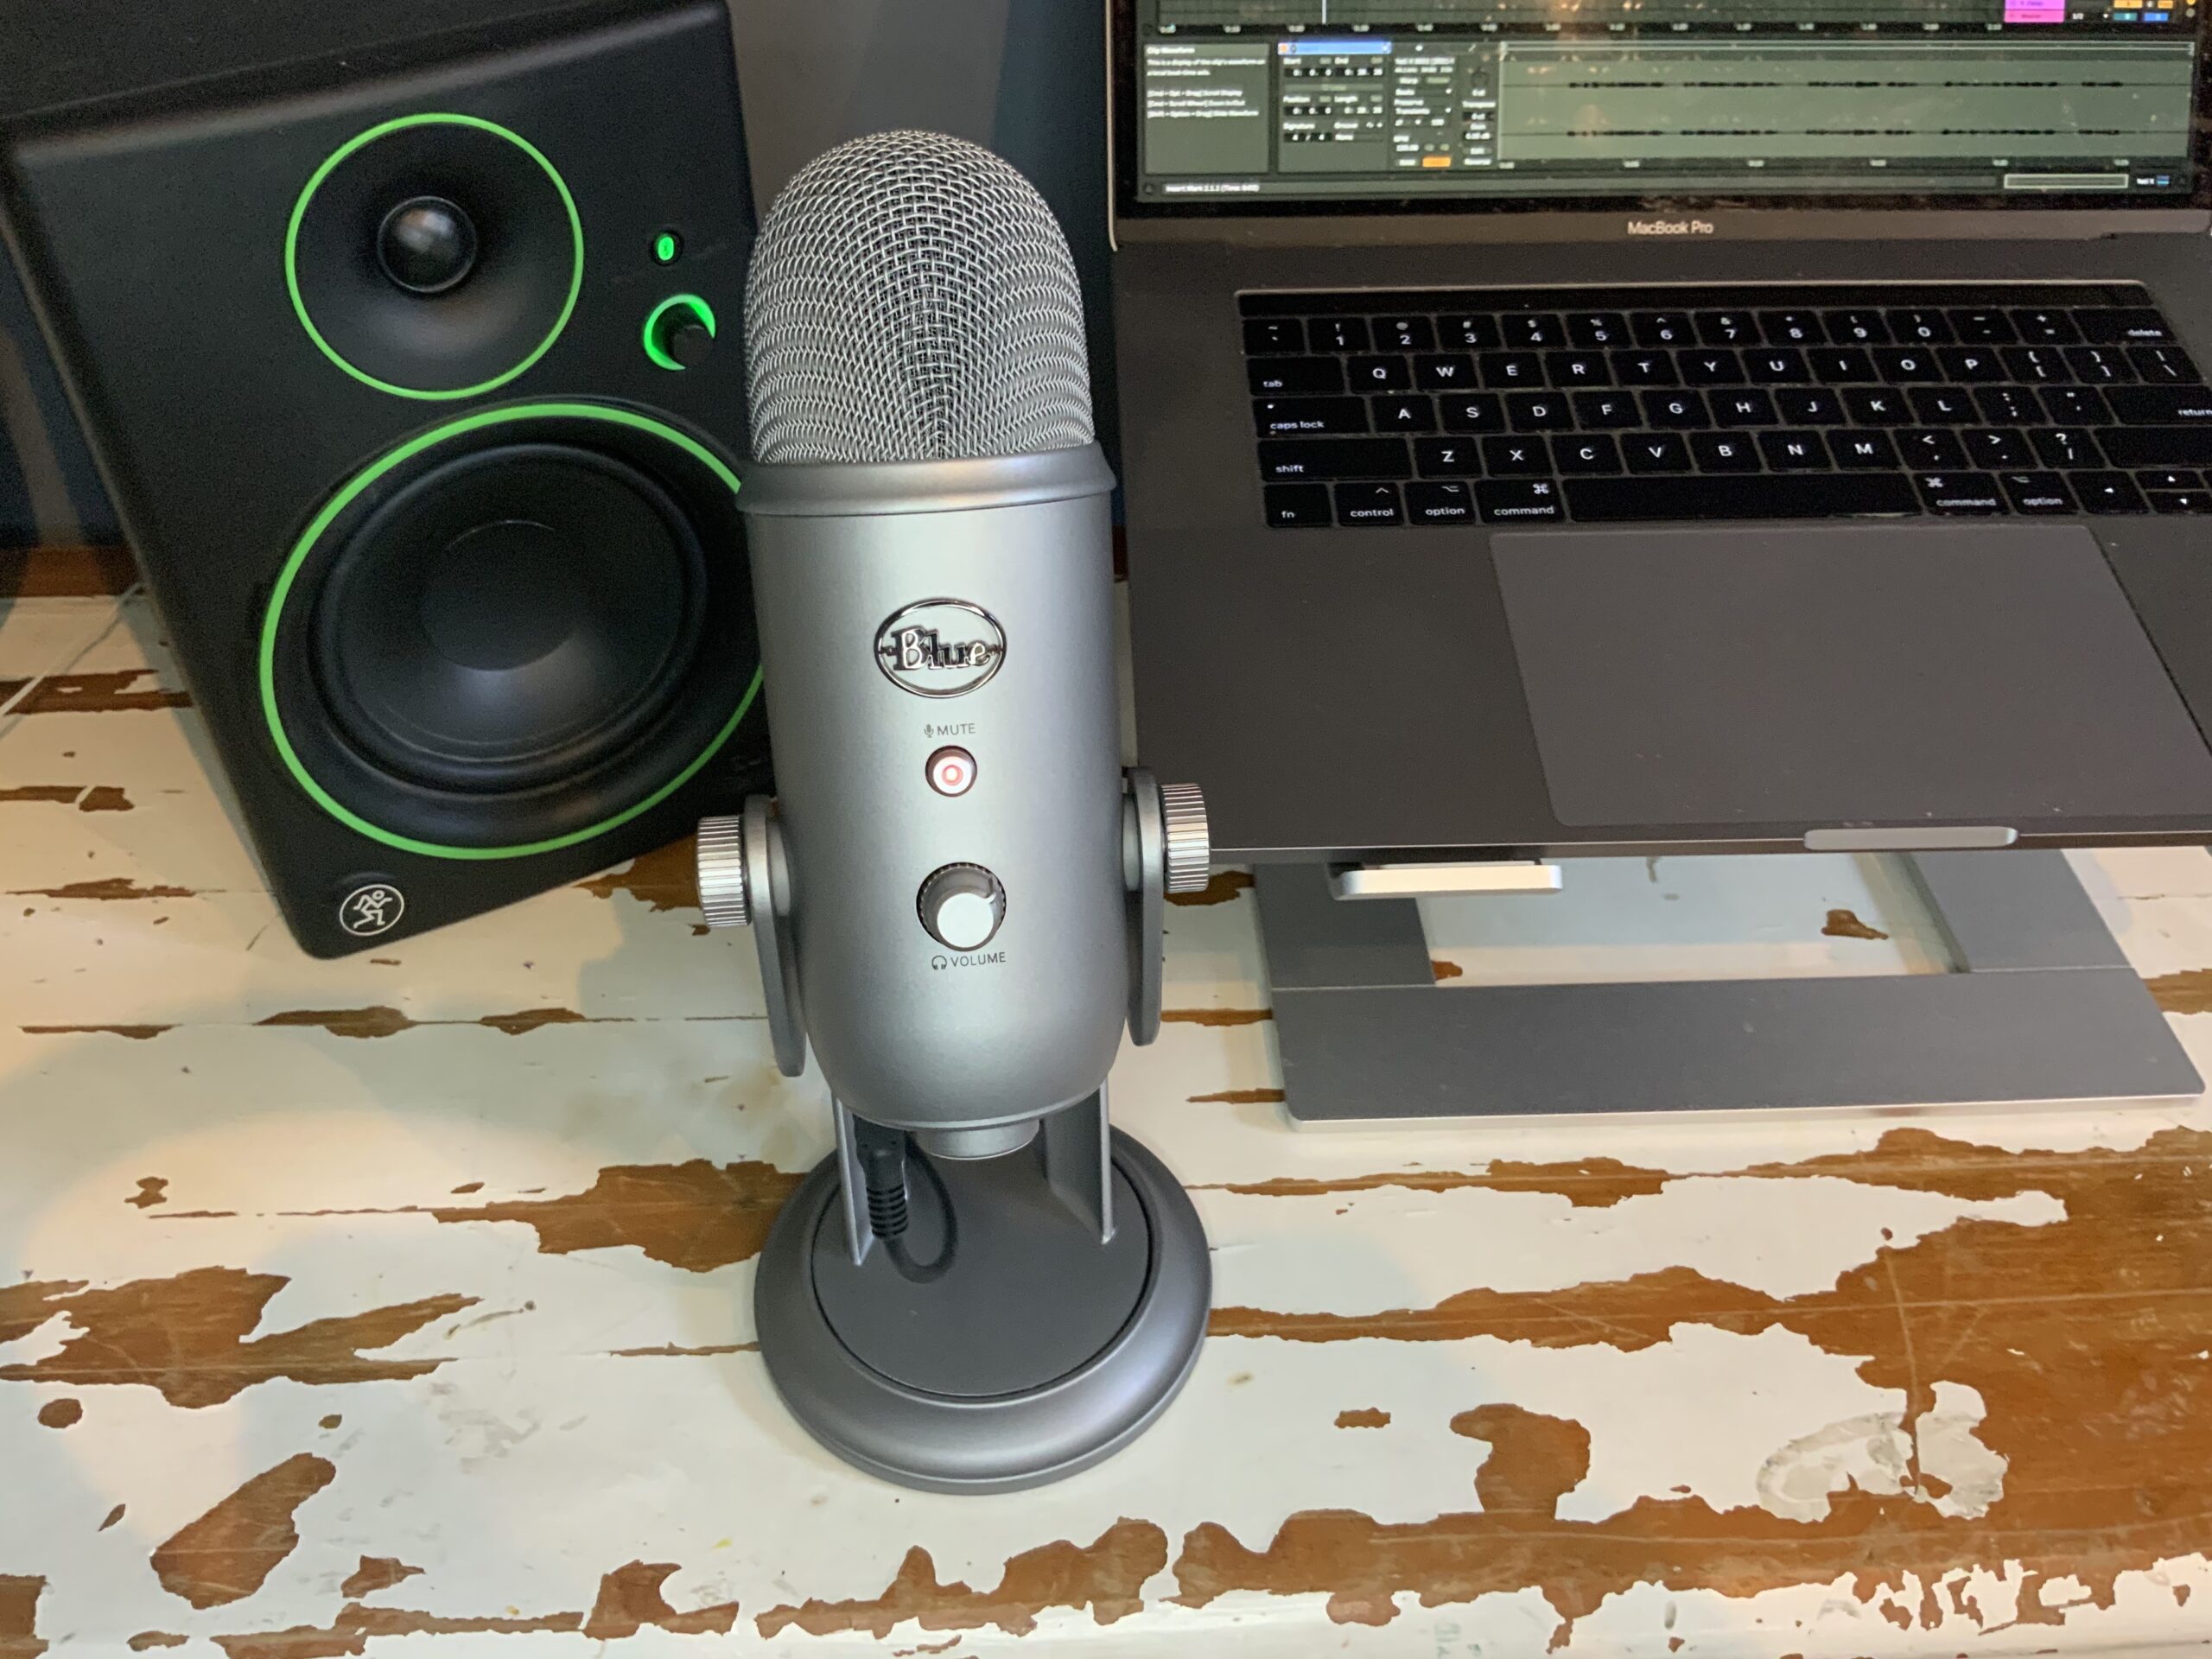 Blue Yeti USB microphone with a MacBook Pro